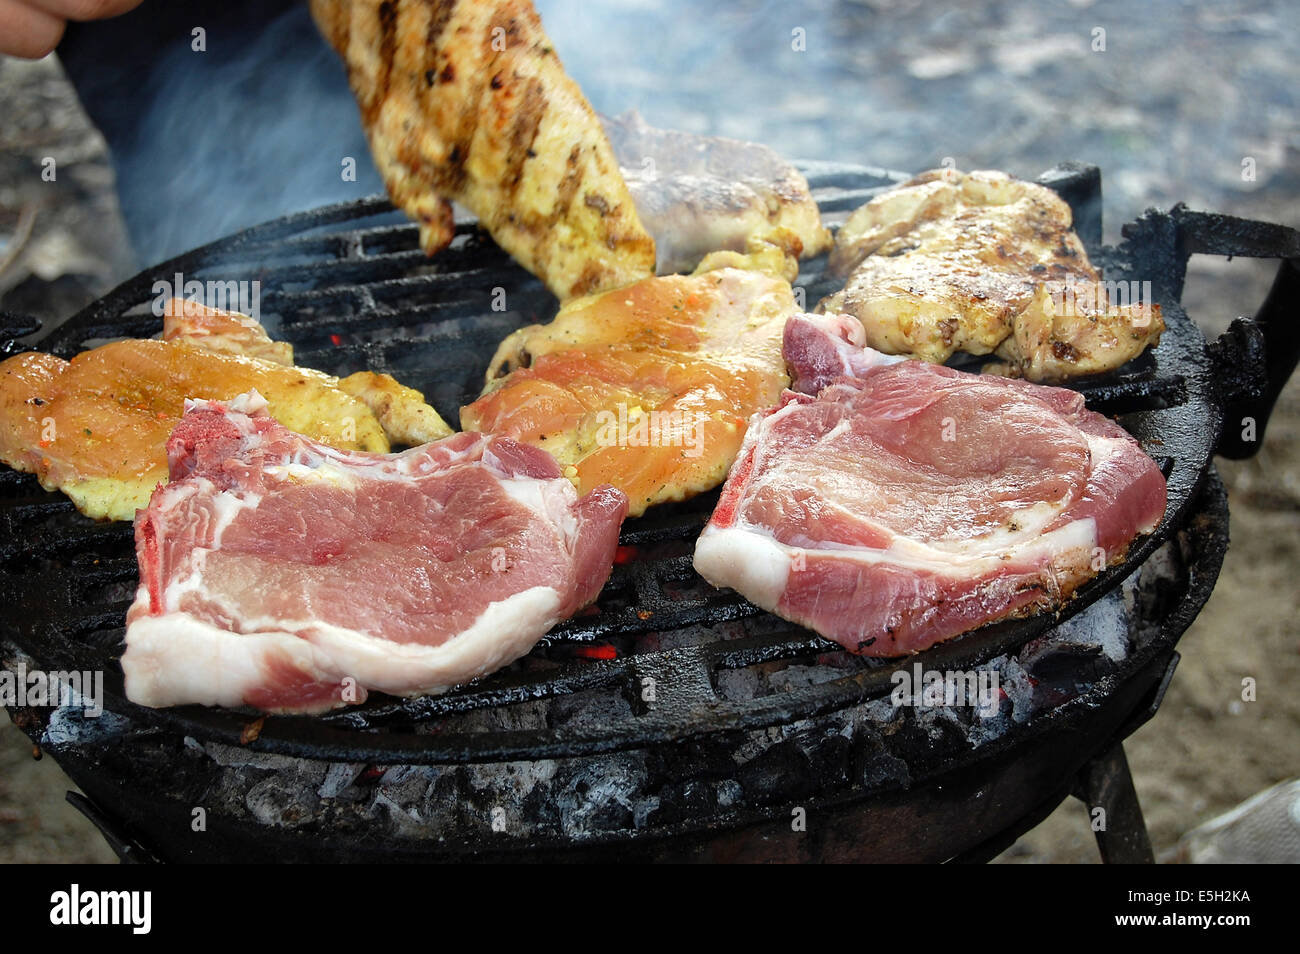 Grilled meat, prepared for a family lunch Stock Photo